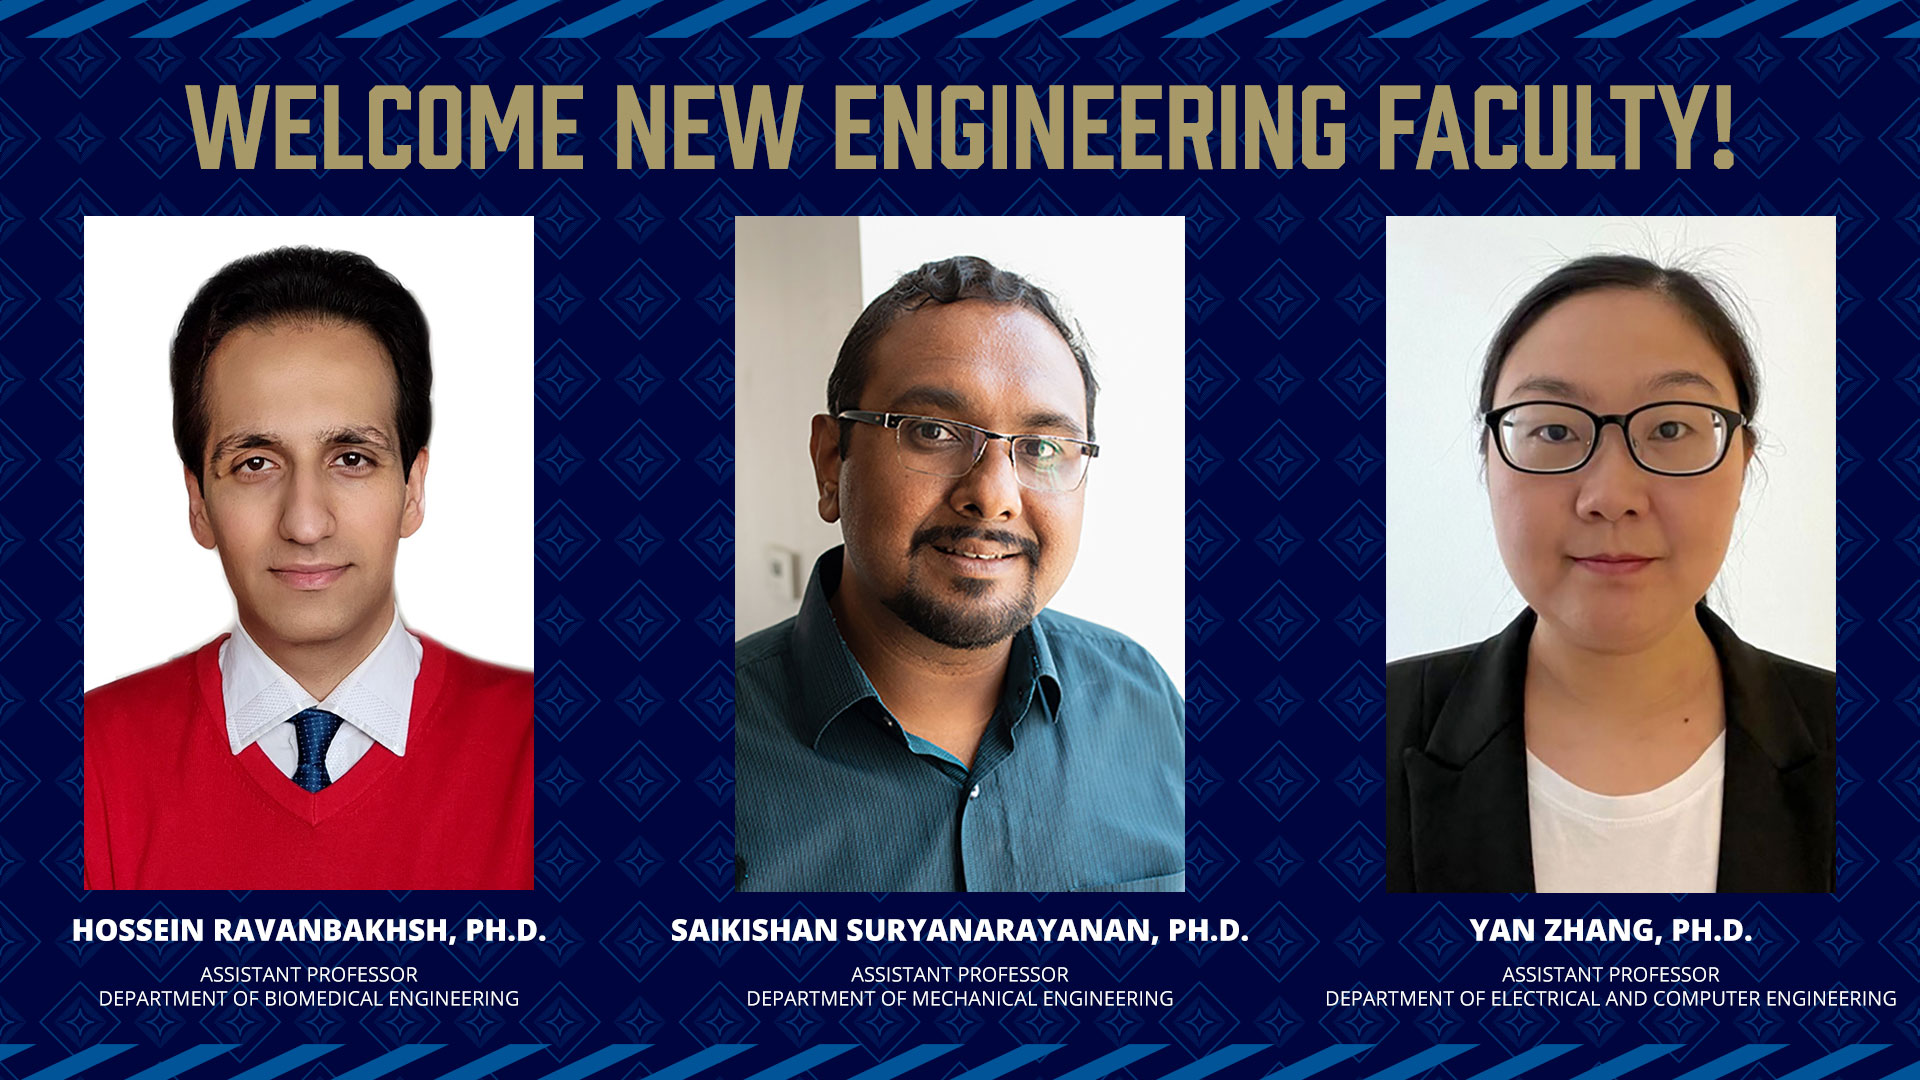 Welcome new engineering faculty